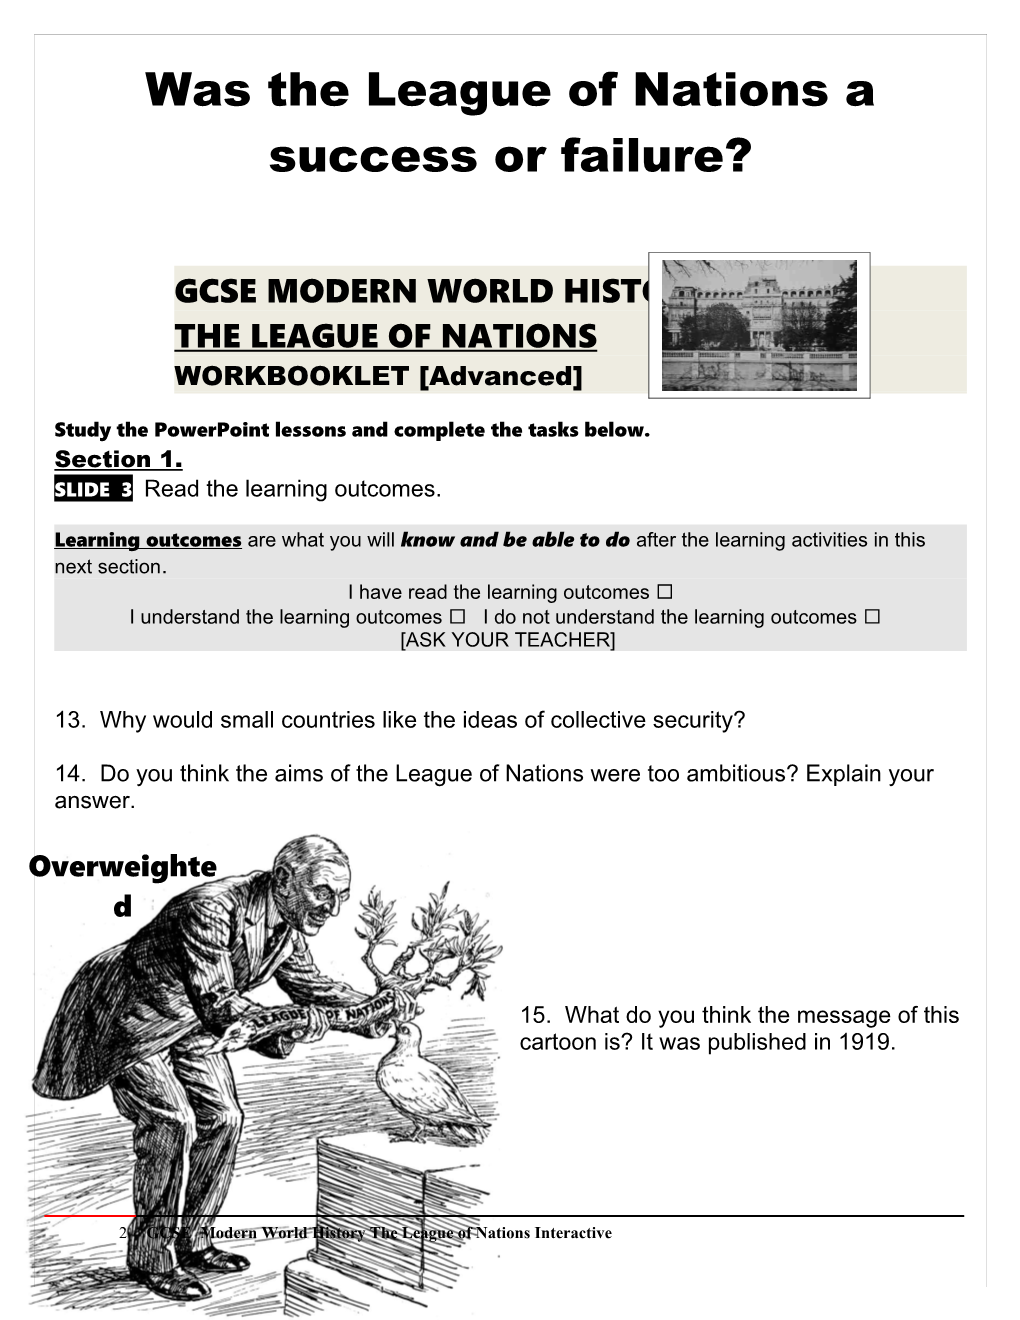 Was the League of Nations a Success Or Failure?